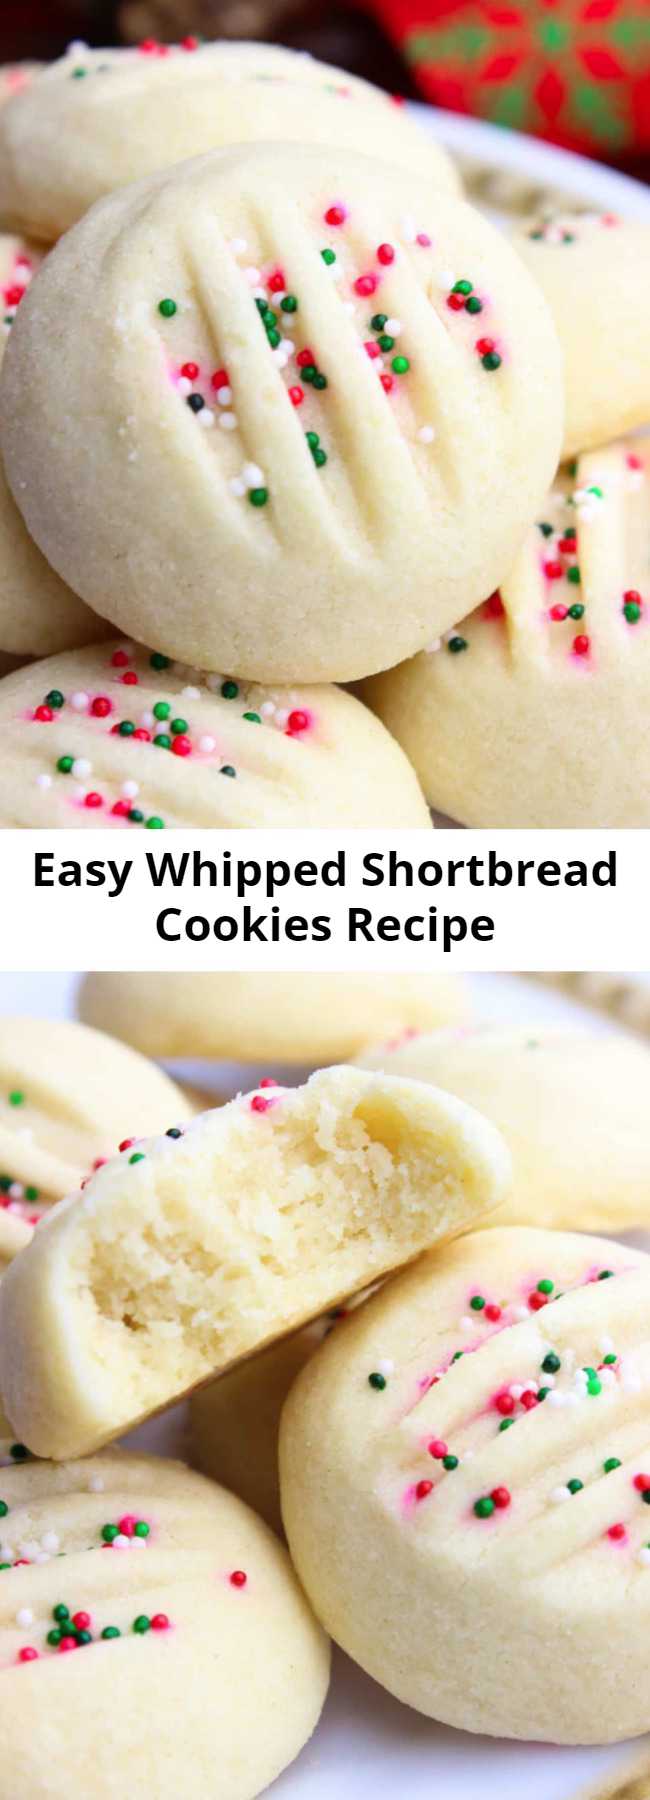 Easy Whipped Shortbread Cookies Recipe - If you are searching for easy Shortbread Cookies, look no further! My buttery and melt in your mouth soft whipped Shortbread Cookies got you covered. #shortbreadcookies #4ingredientscookies #cookies #easycookies #cookiesrecipes #prettycookies #easyshortbreadcookies #christmascookies #christmasrecipes